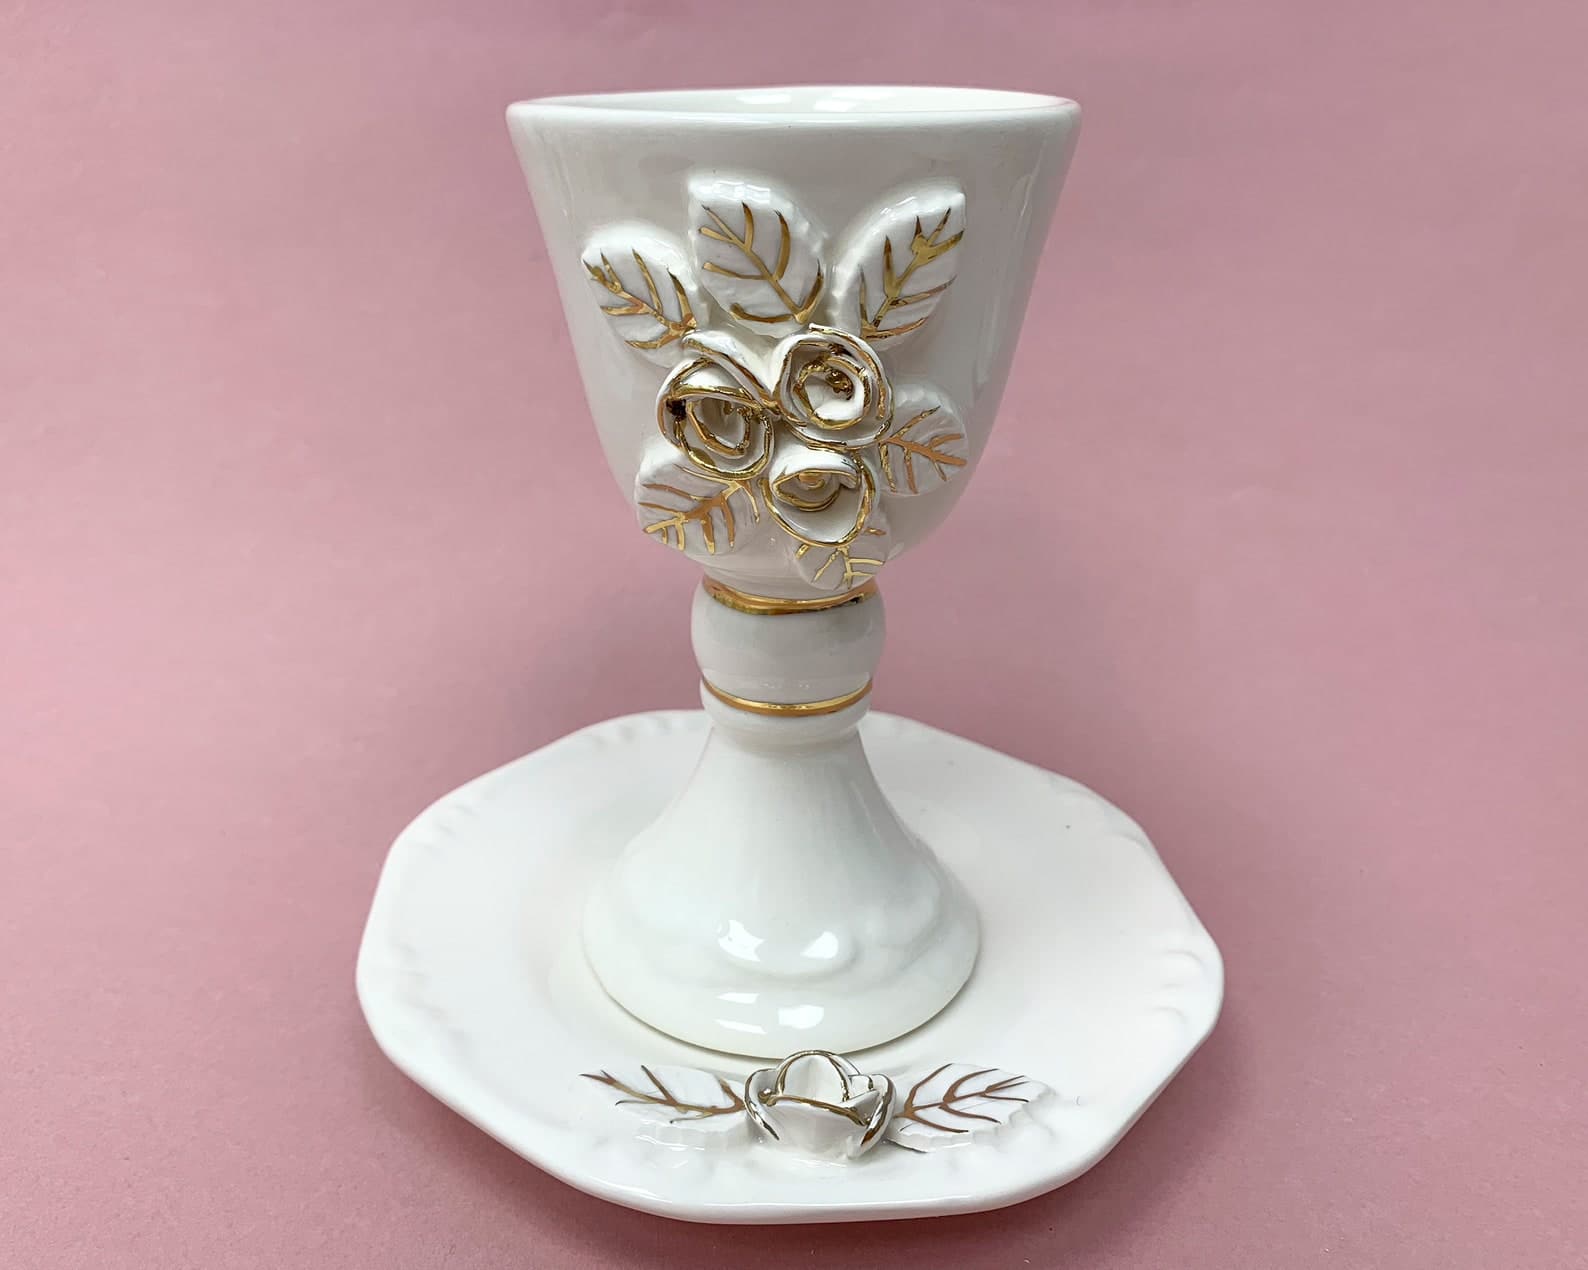 White Ceramic Wine Cup and Plate with Gold Detailing